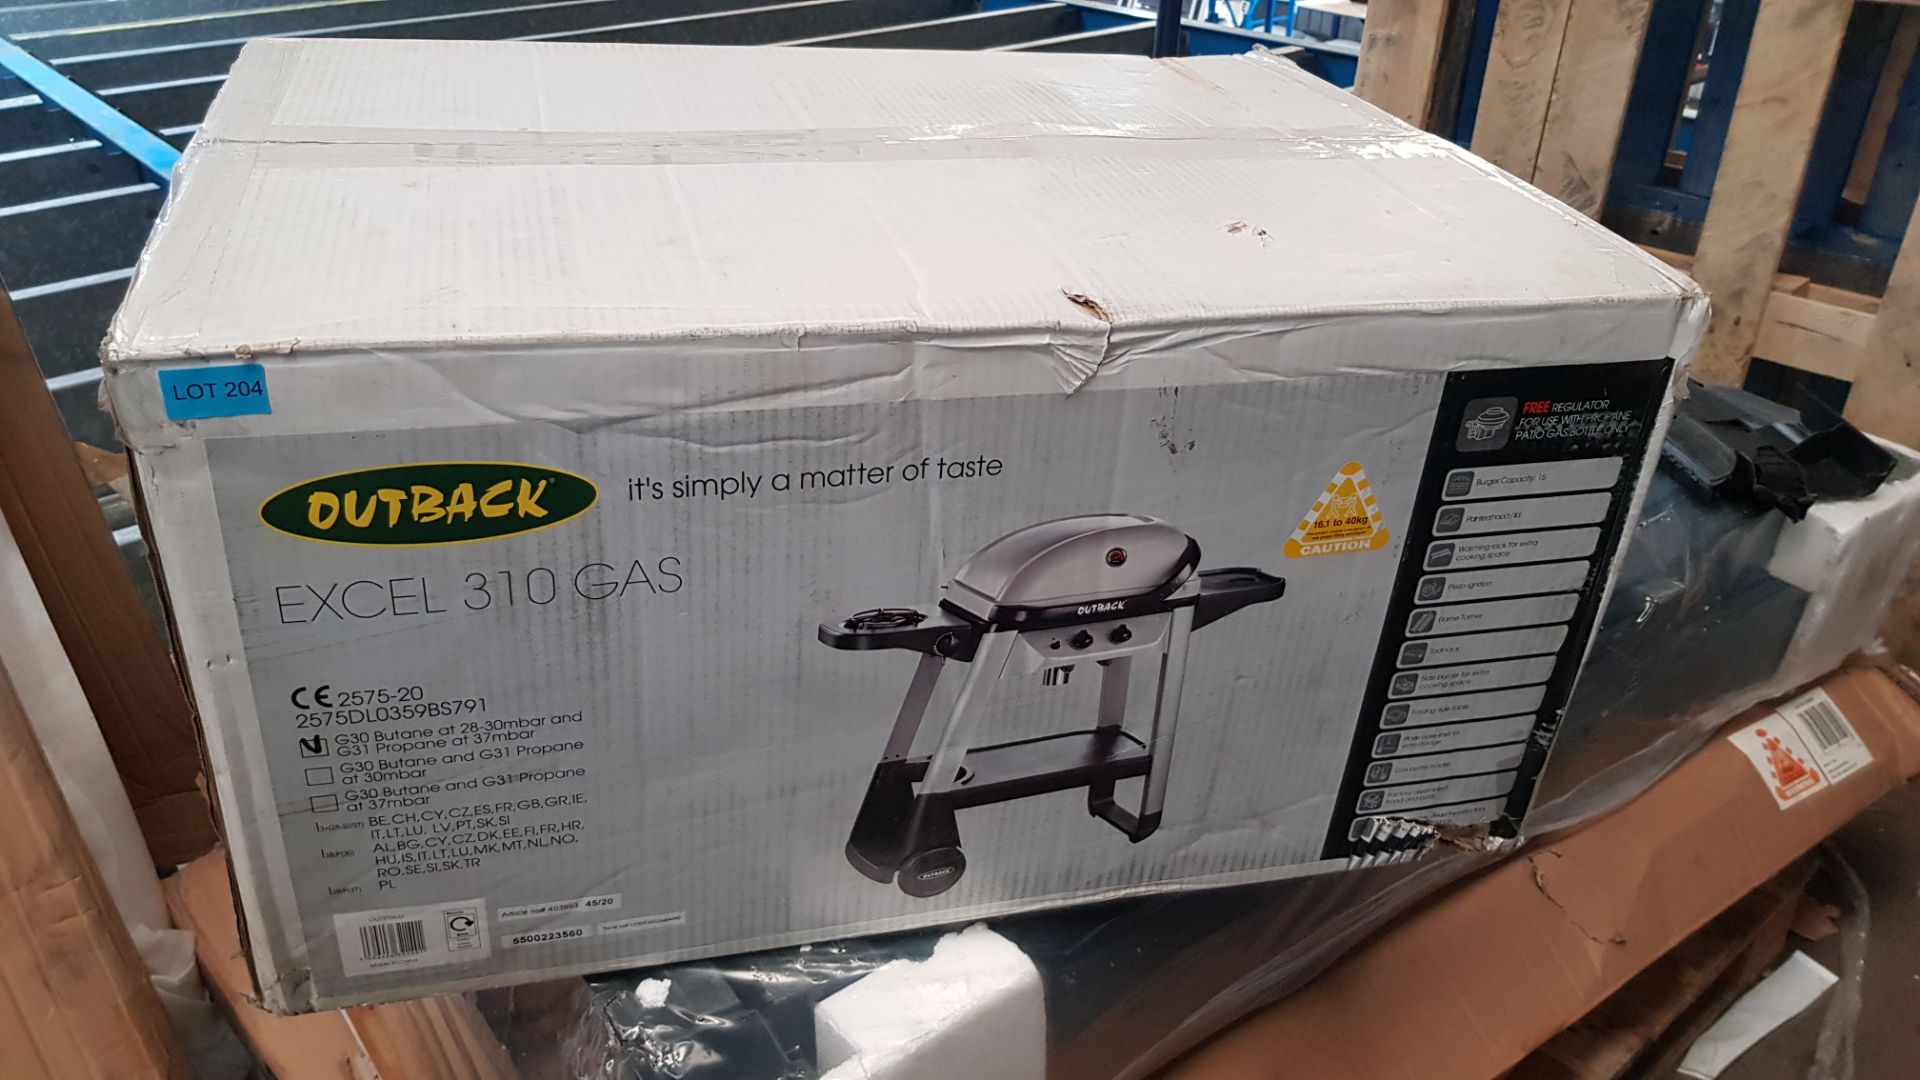 (P7) 1x Outback Excel 310 Gas BBQ Silver RRP £100. New, Sealed Unit, With Very Slight Damage To Box - Image 3 of 4